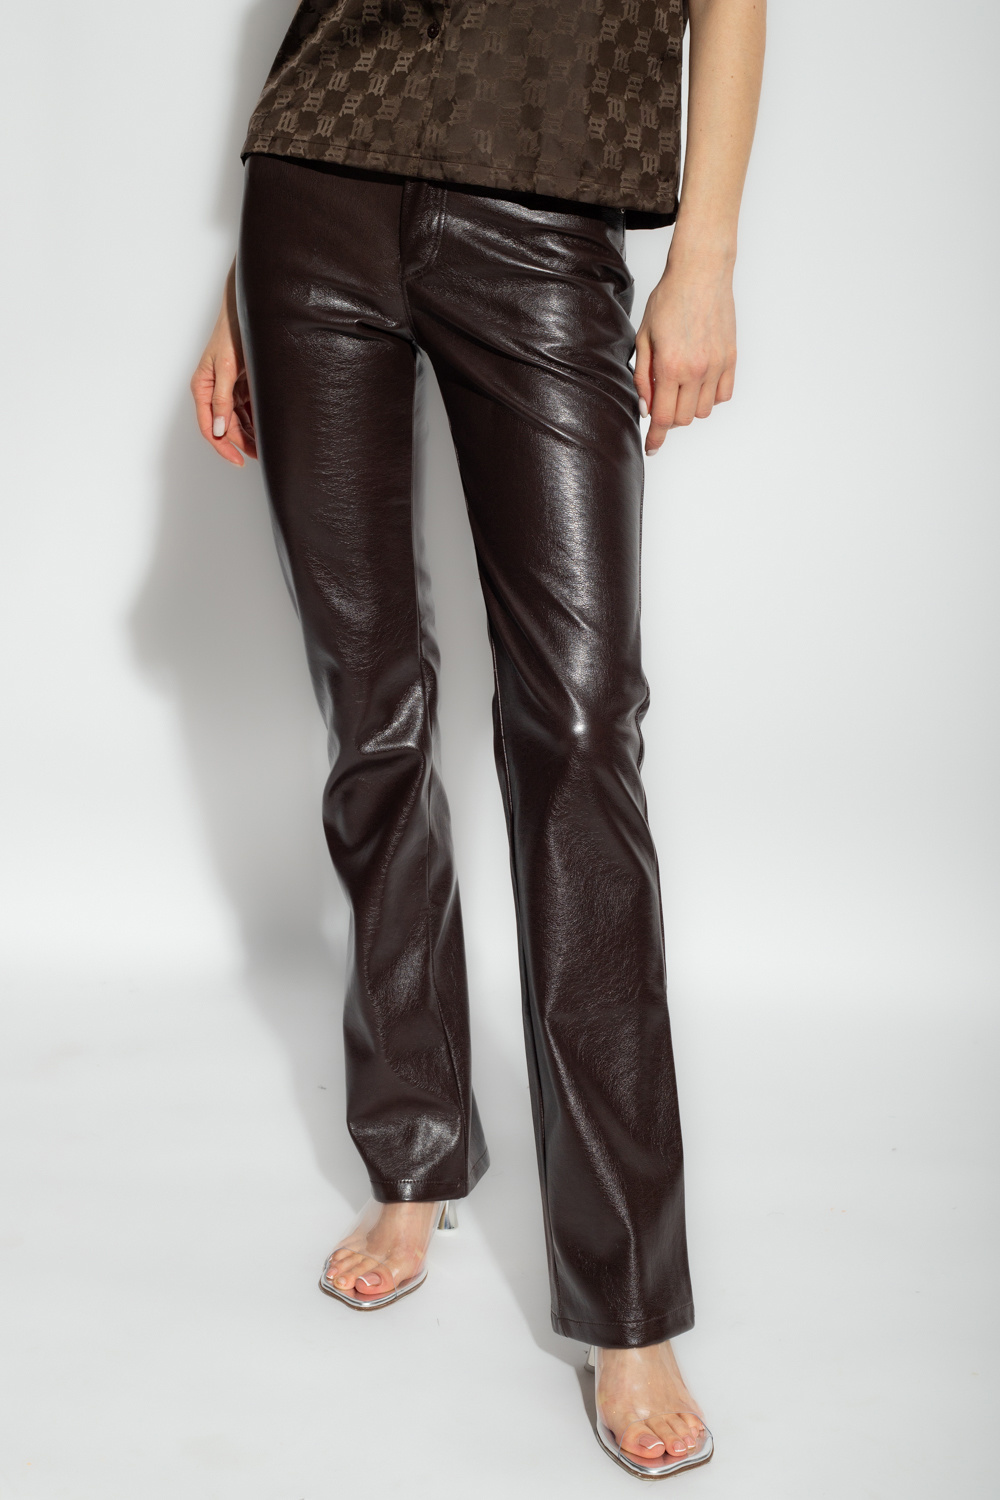 MISBHV trousers golf in vegan leather